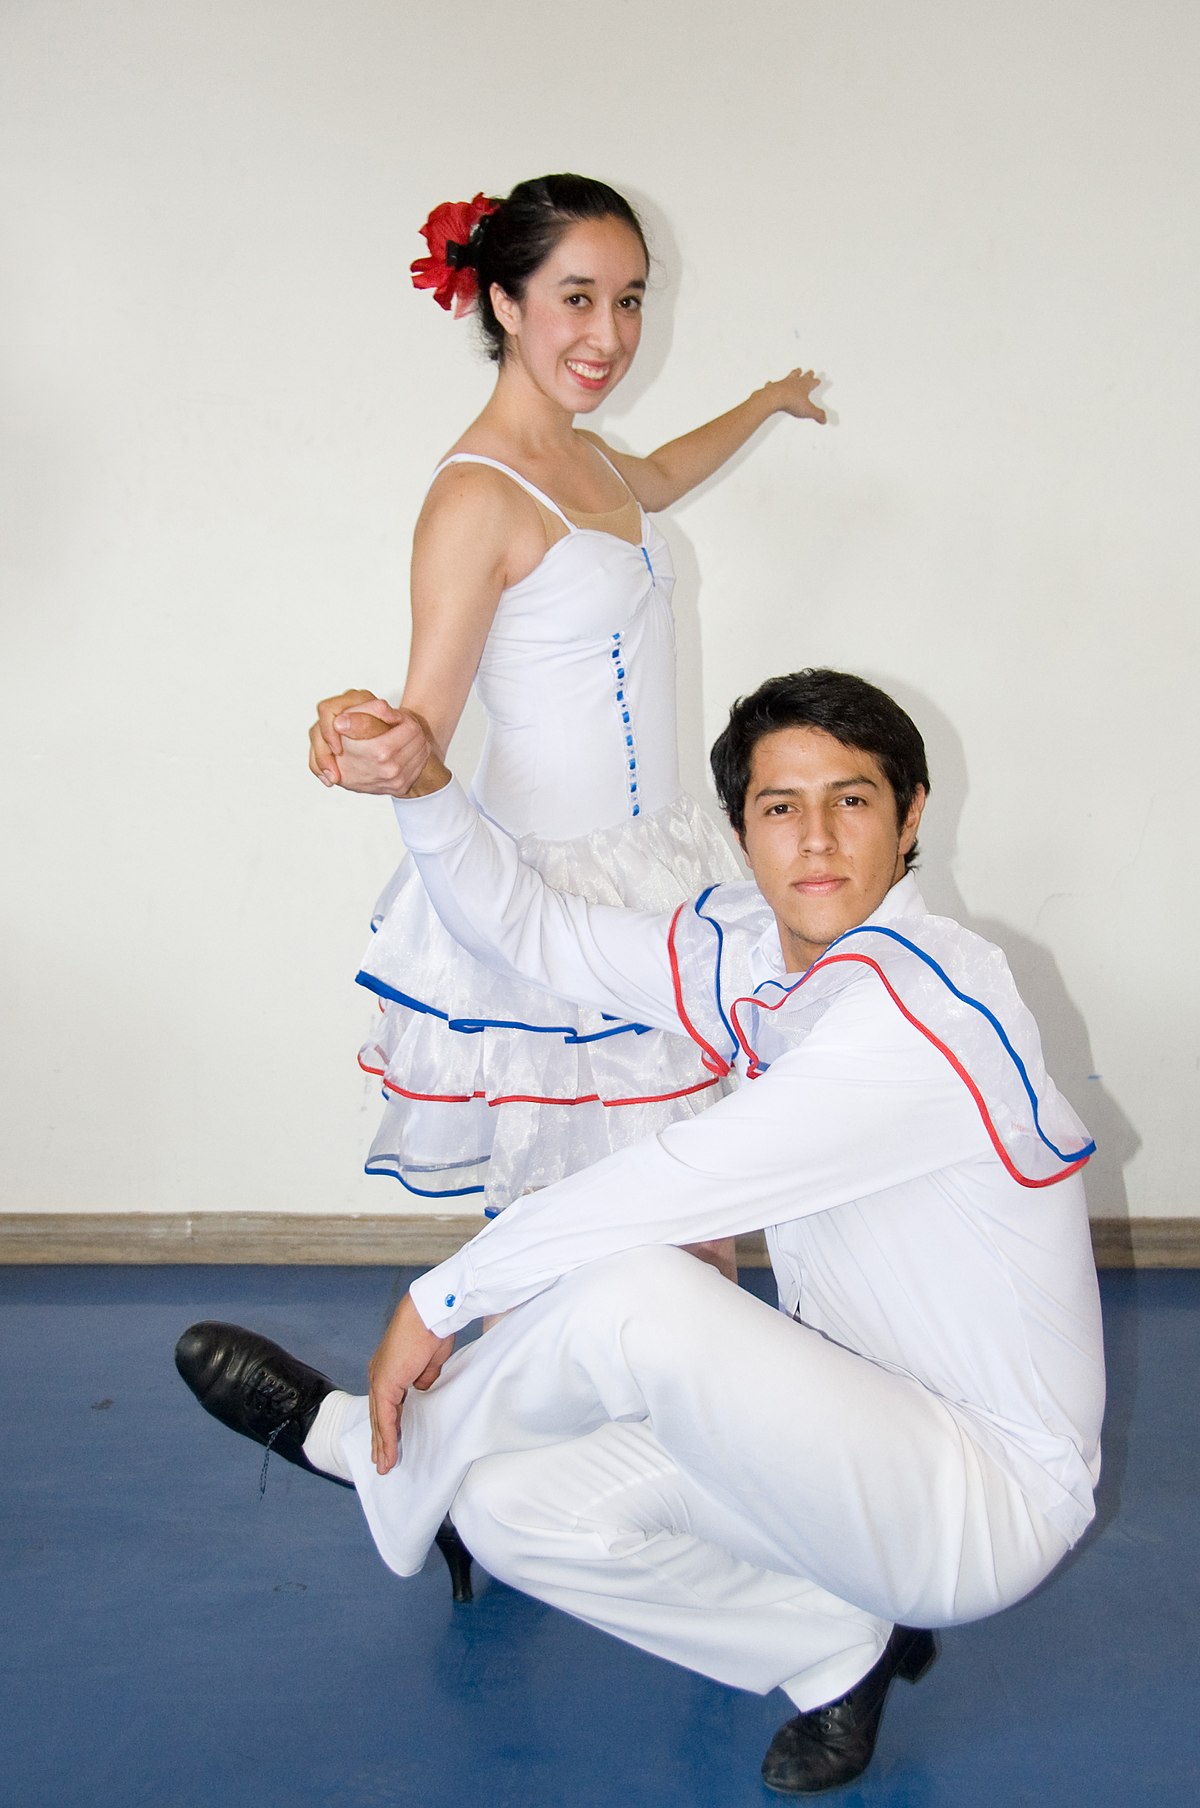 The cuban dance performers